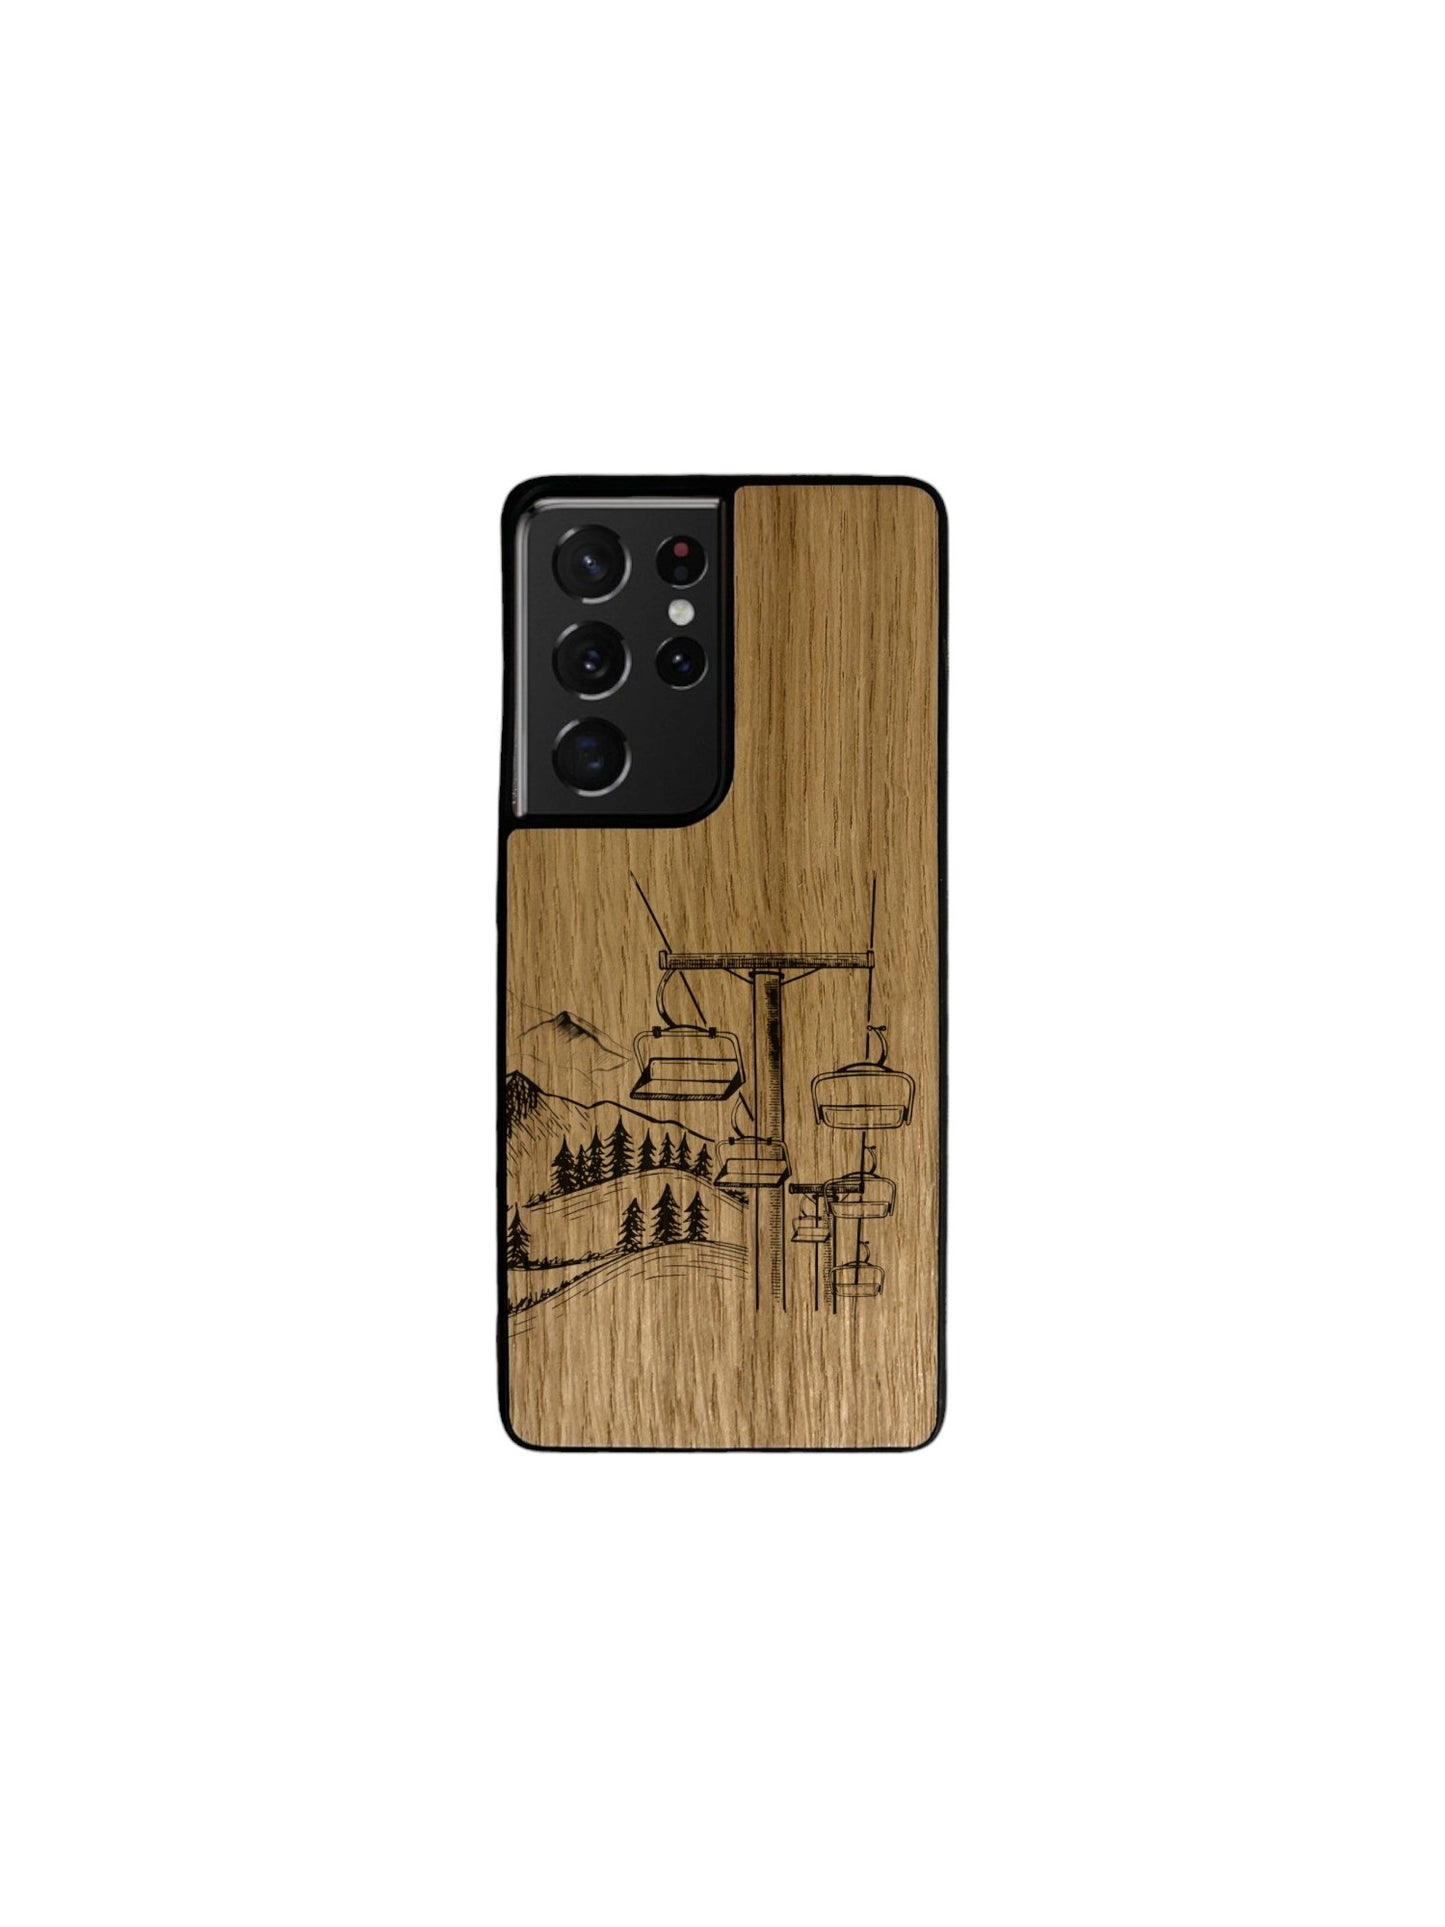 Samsung Galaxy S case - Chairlift